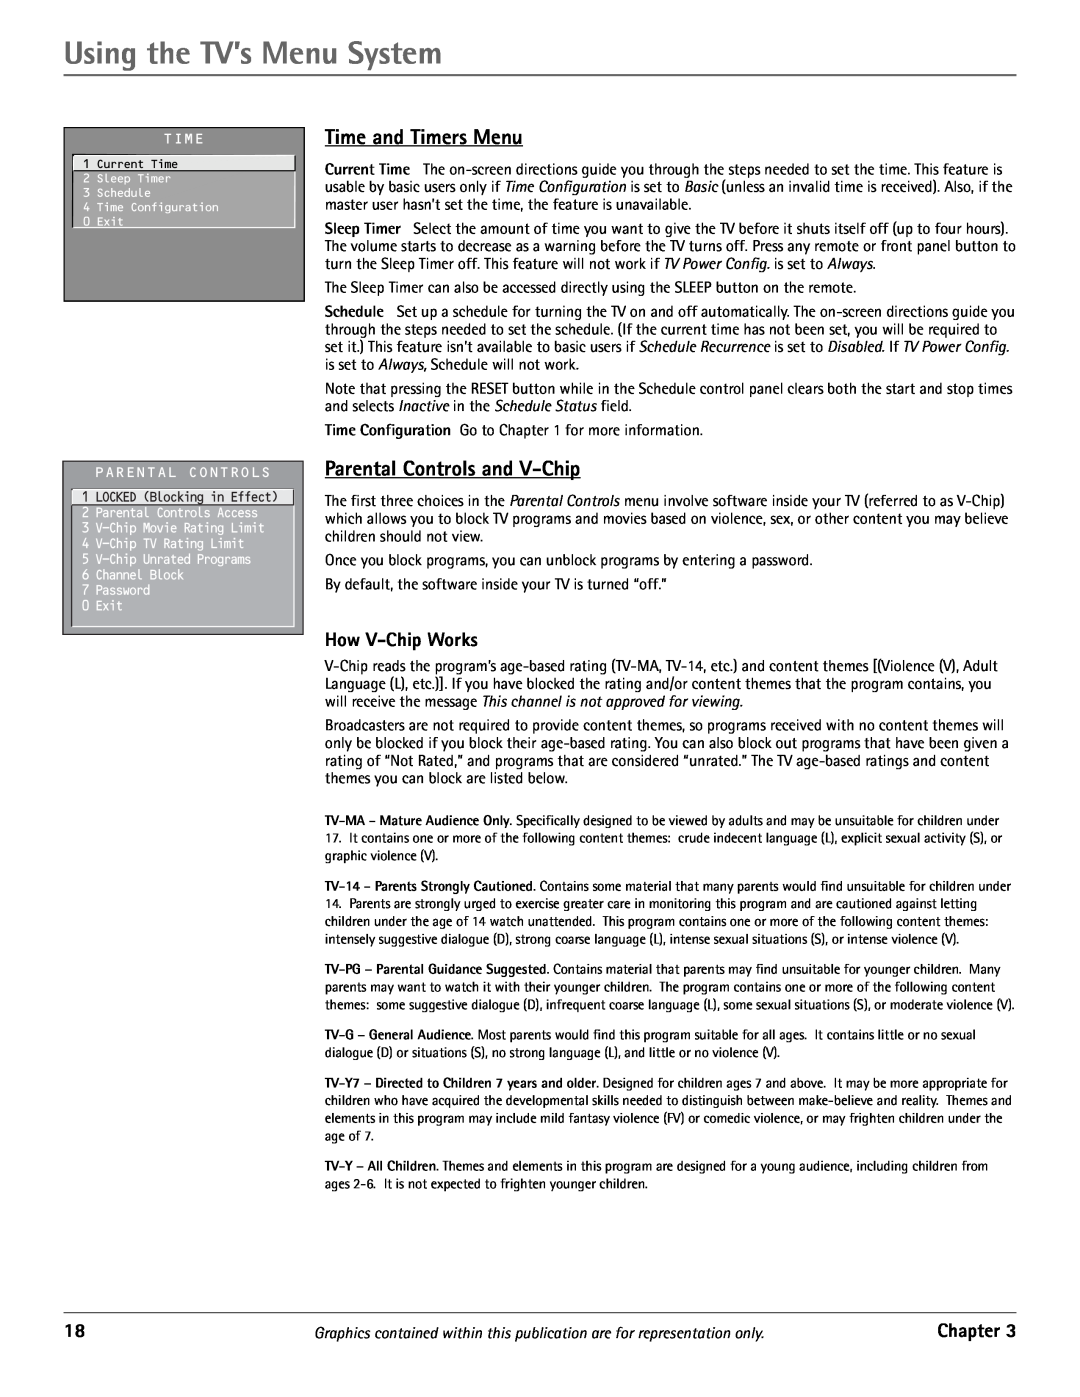 RCA J20542 manual Time and Timers Menu, Parental Controls and V-Chip, How V-Chip Works, Using the TV’s Menu System, Chapter 